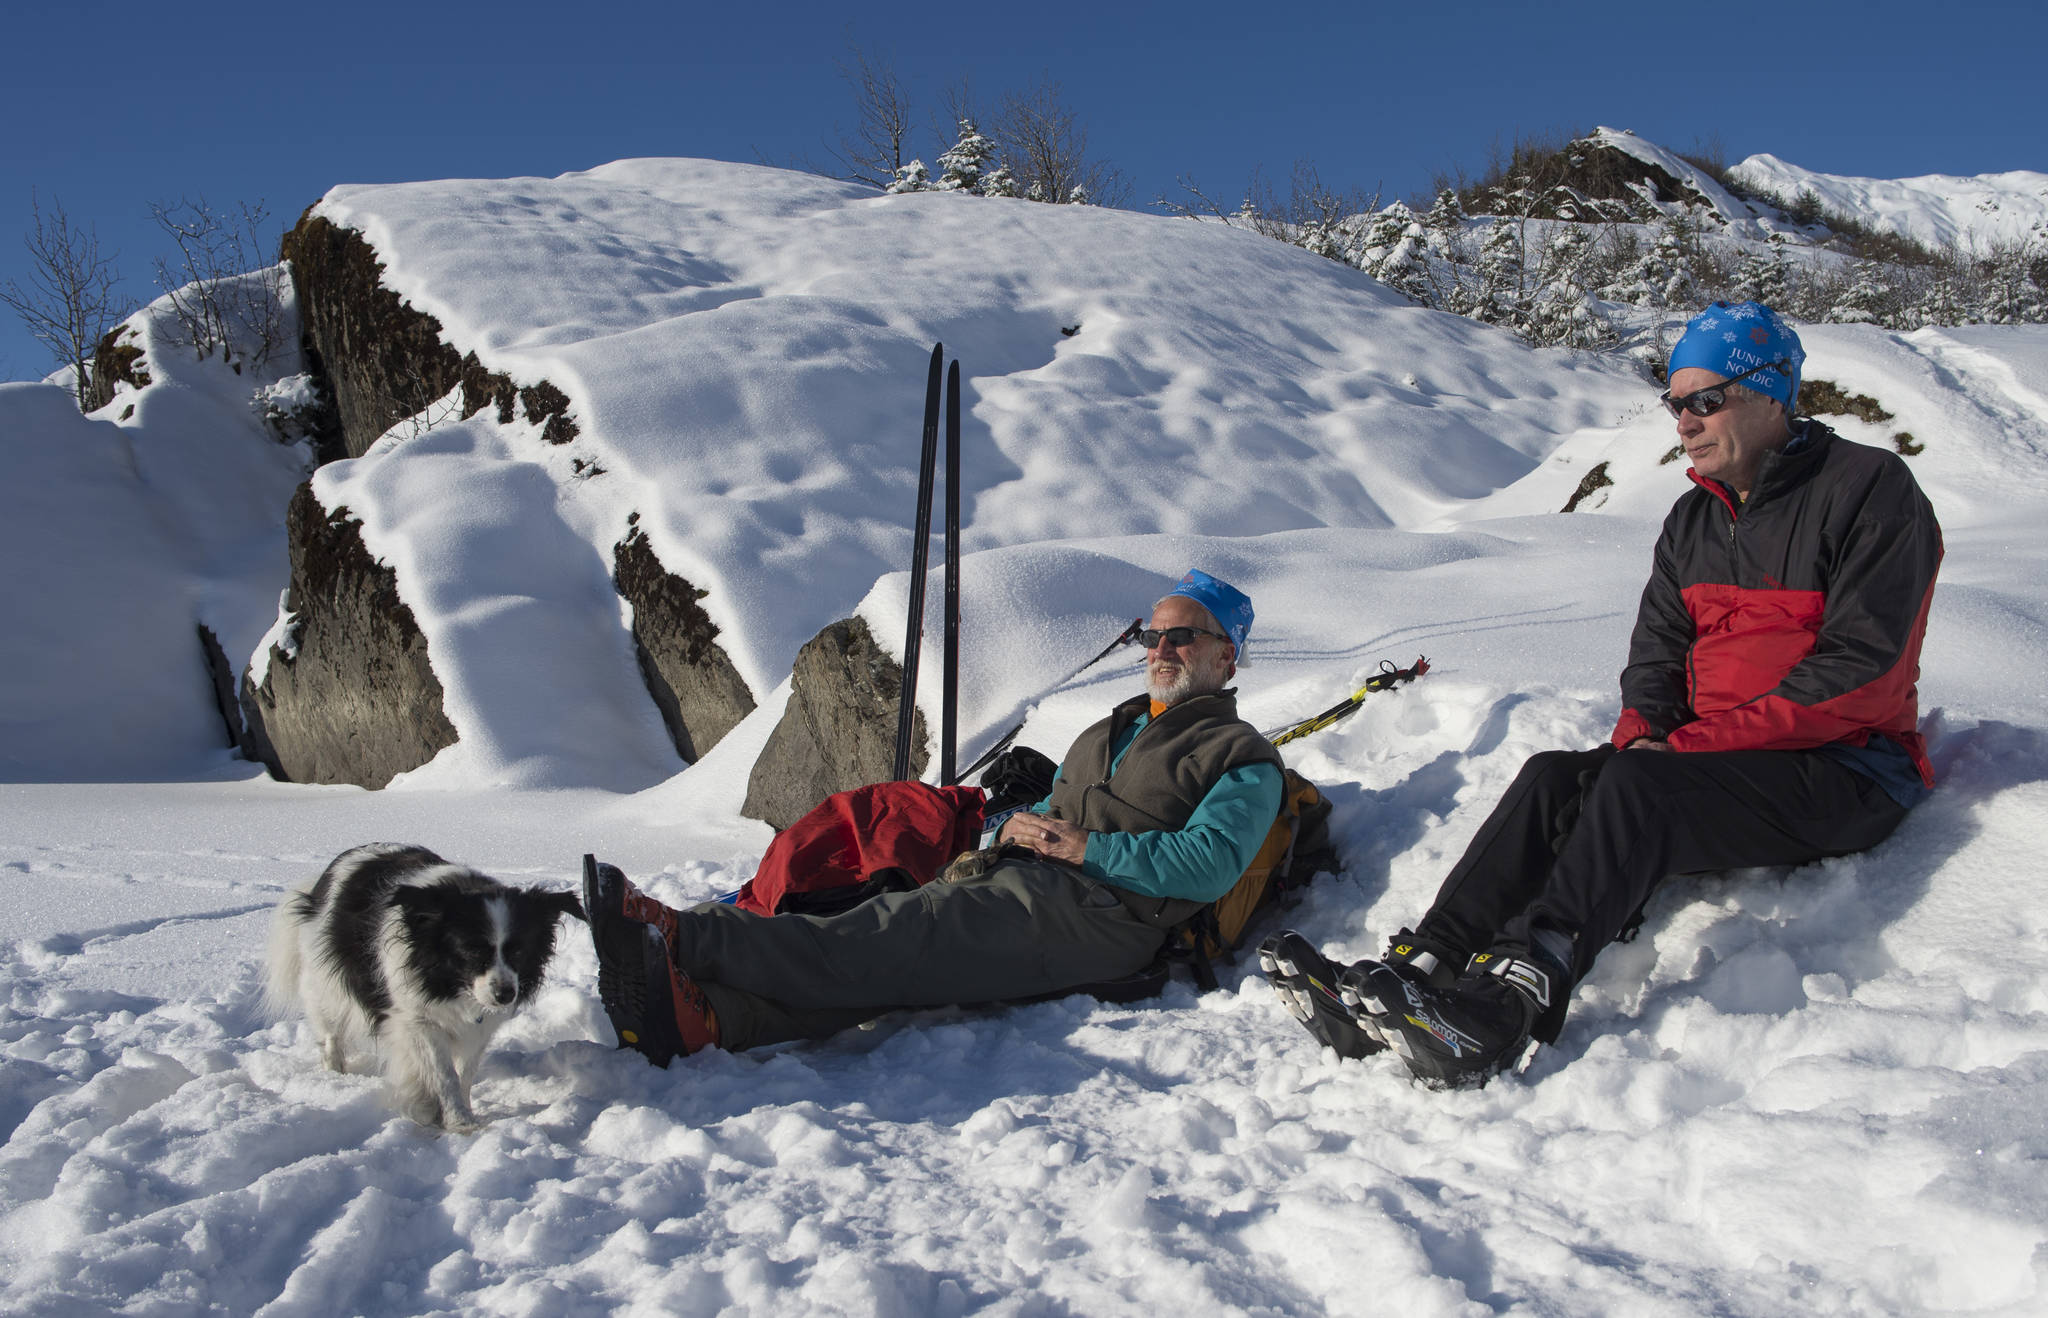 Greg Cook, with his dog, Hibou, and Dr. John Connolly relax in the sun while out skiing at Mendenhall Lake on Monday, Feb. 11, 2019. (Michael Penn | Juneau Empire)